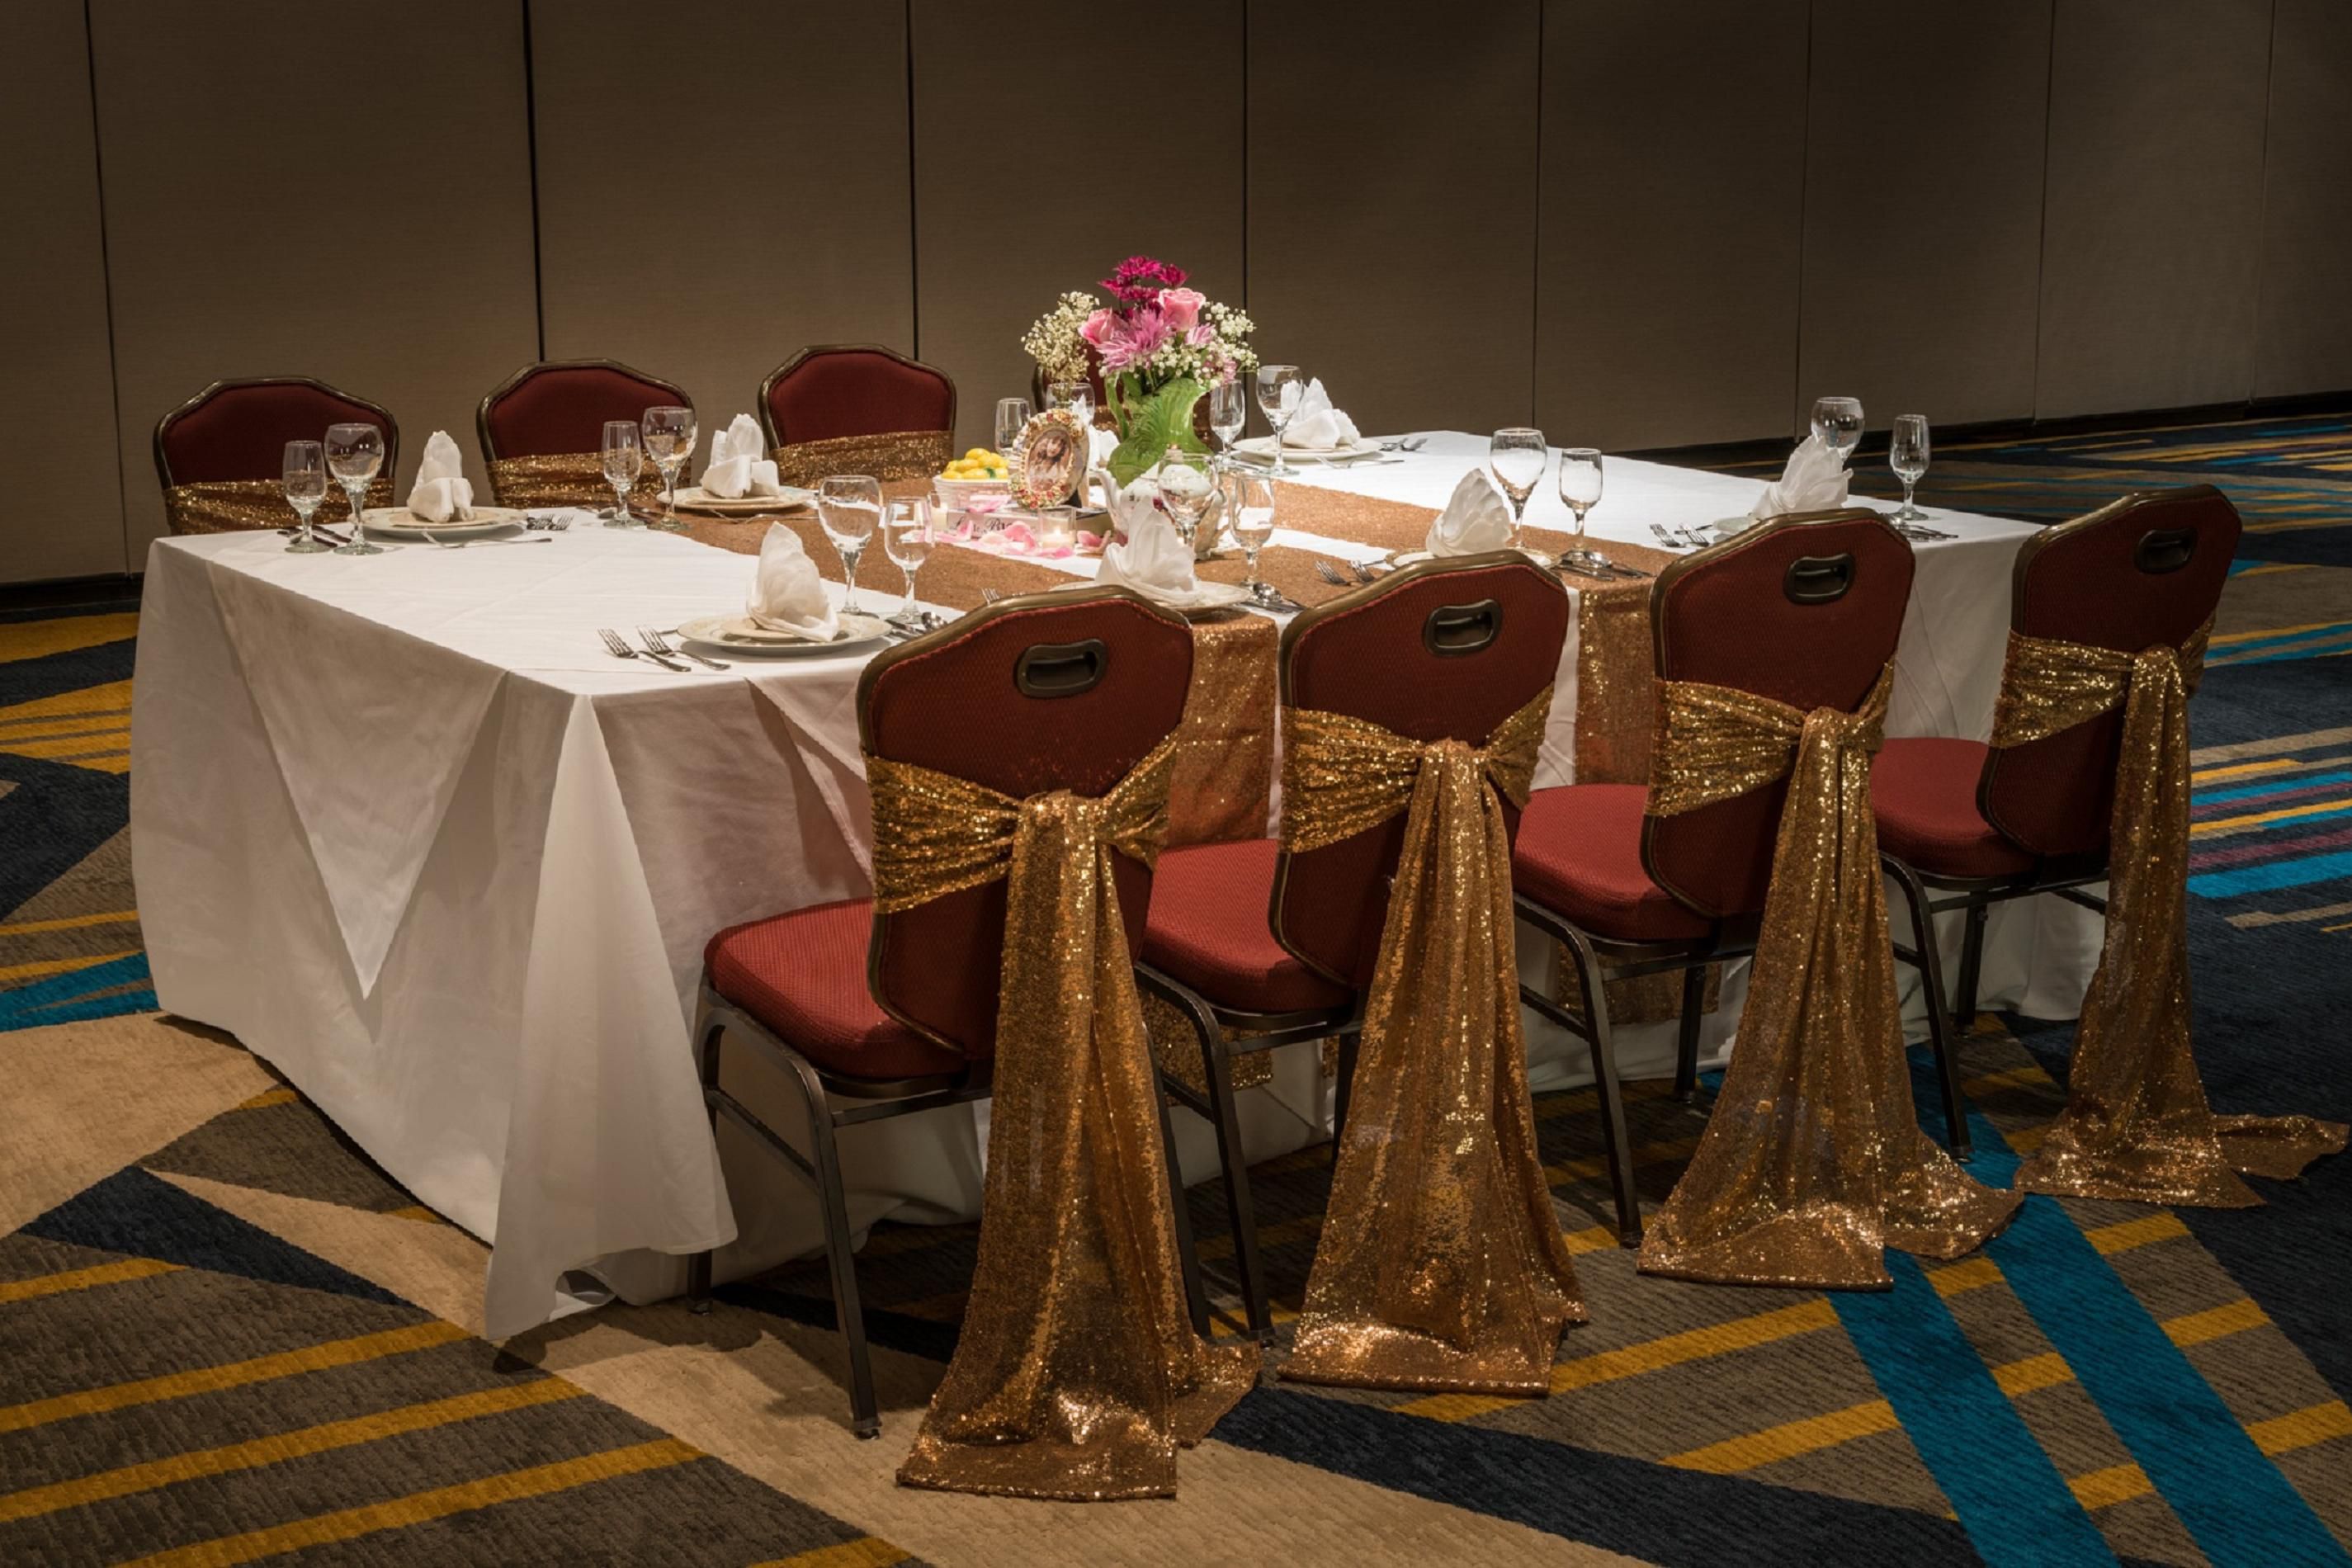 A wedding classic banquet set in the ballroom at the Crowne Plaza.